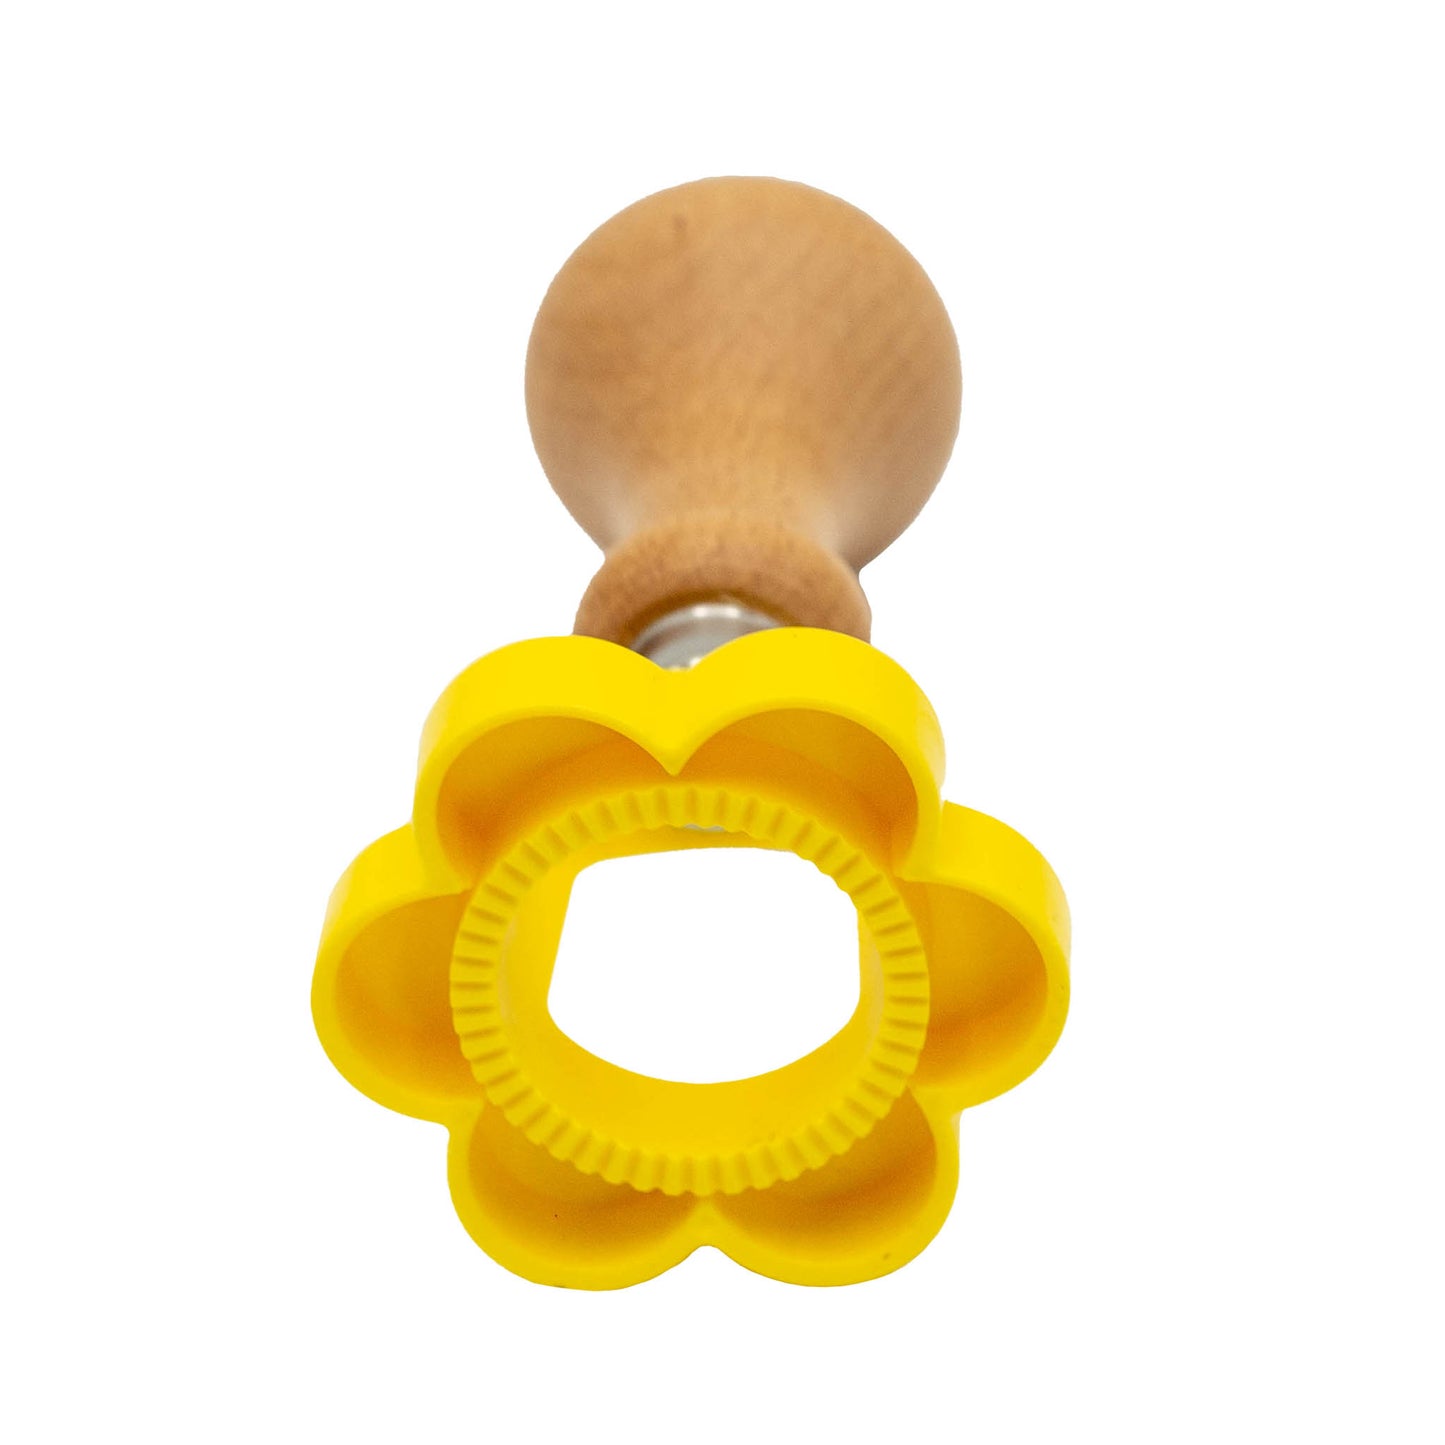 Italian made yellow plastic flower shape biscuit and pastry cutter with wooden handle.